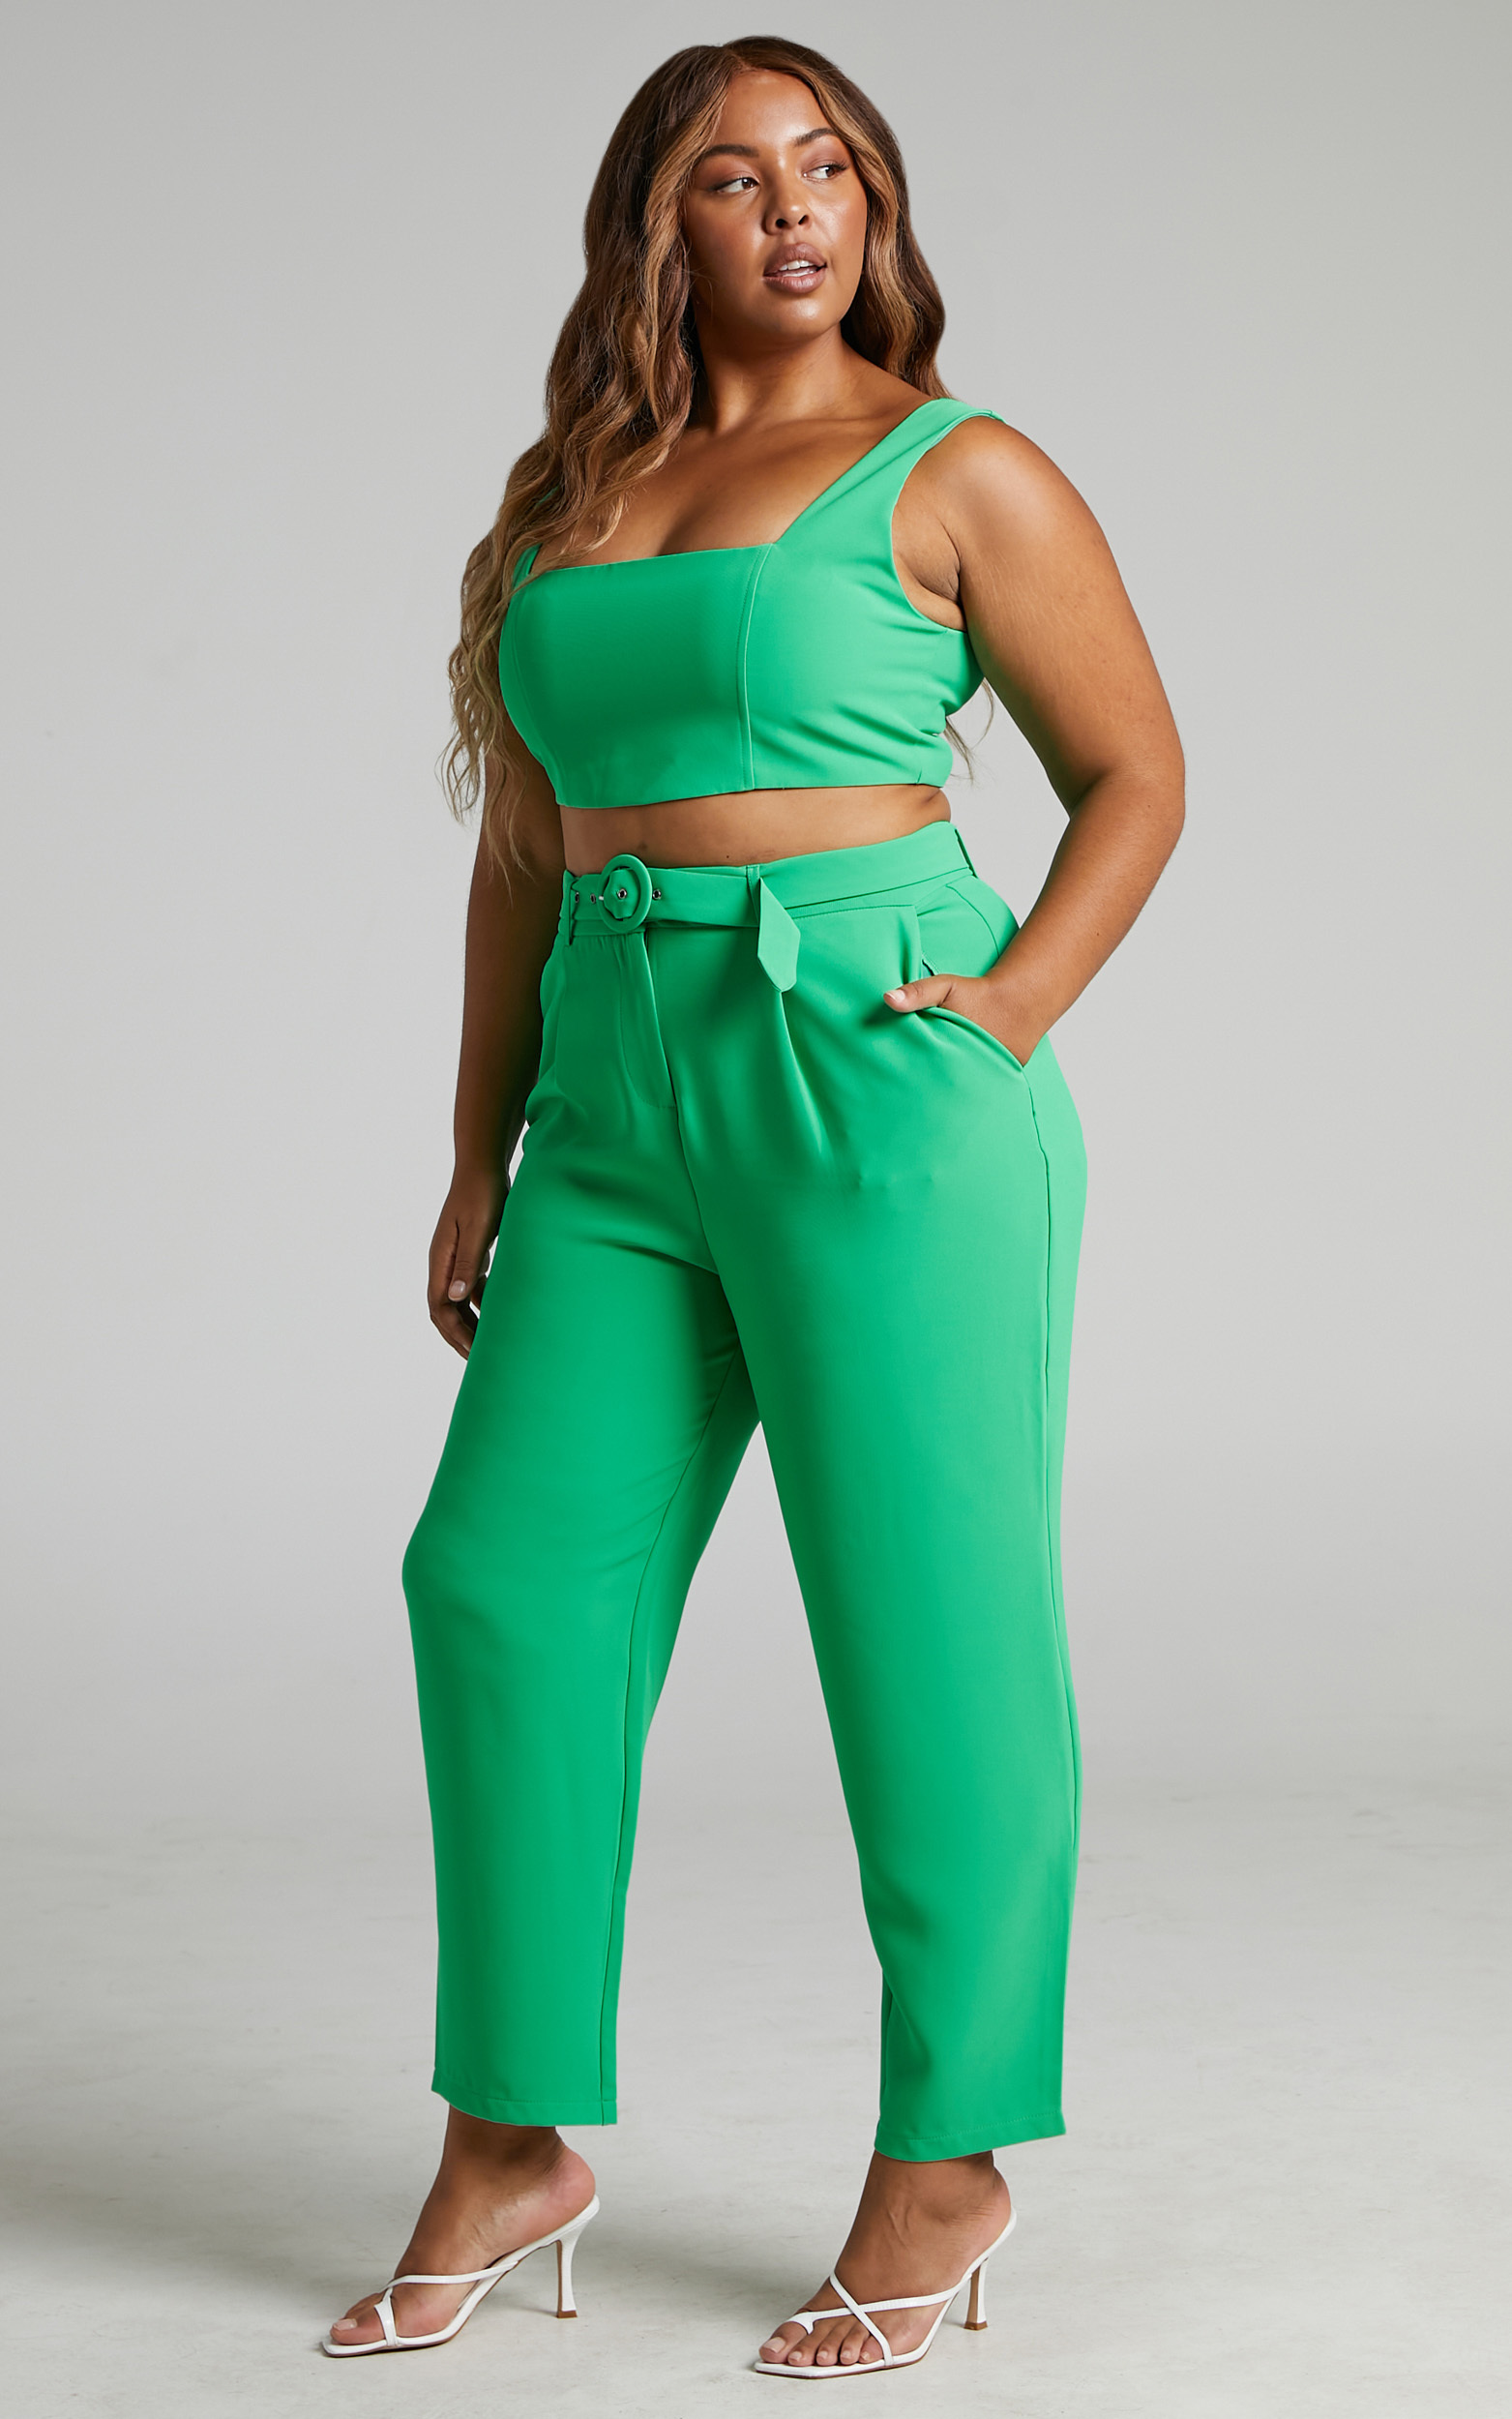 Reyna Two Piece Set Crop Top And Tailored Pants In Green Showpo Eu